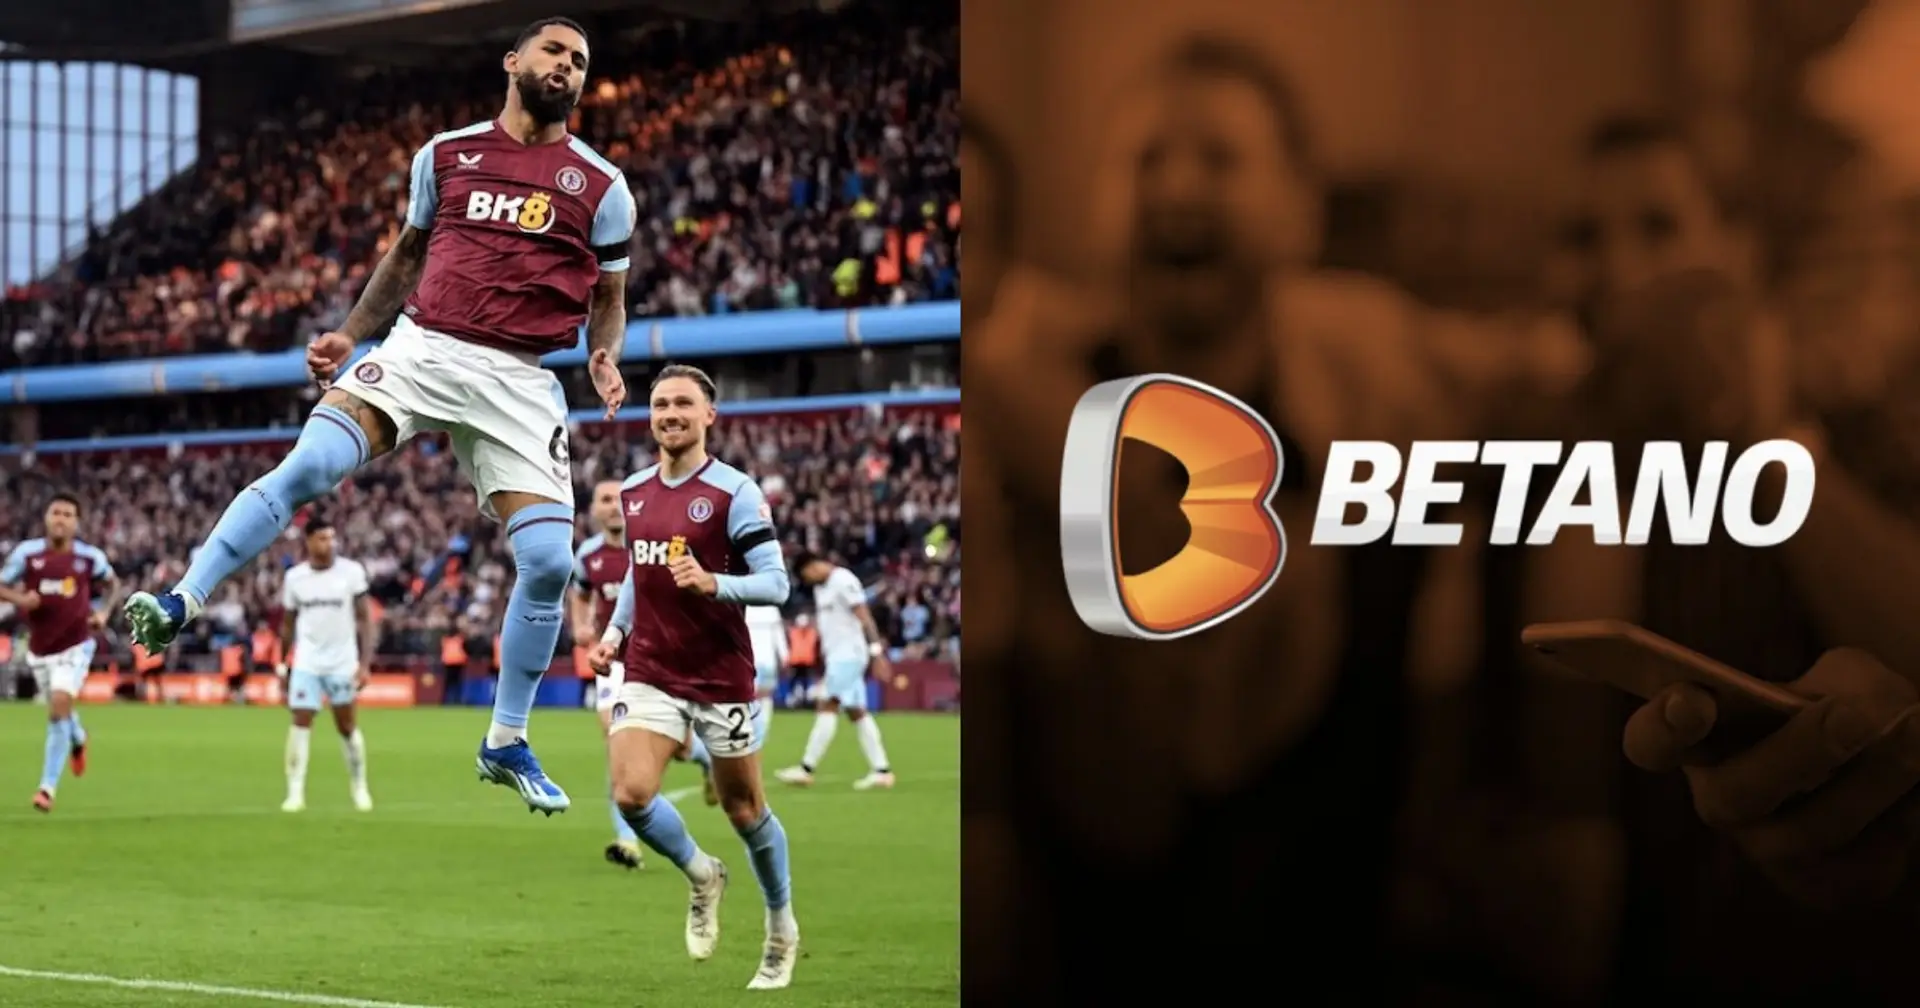 Betano to replace BK8 as shirt sponsor for Aston Villa in £40m deal